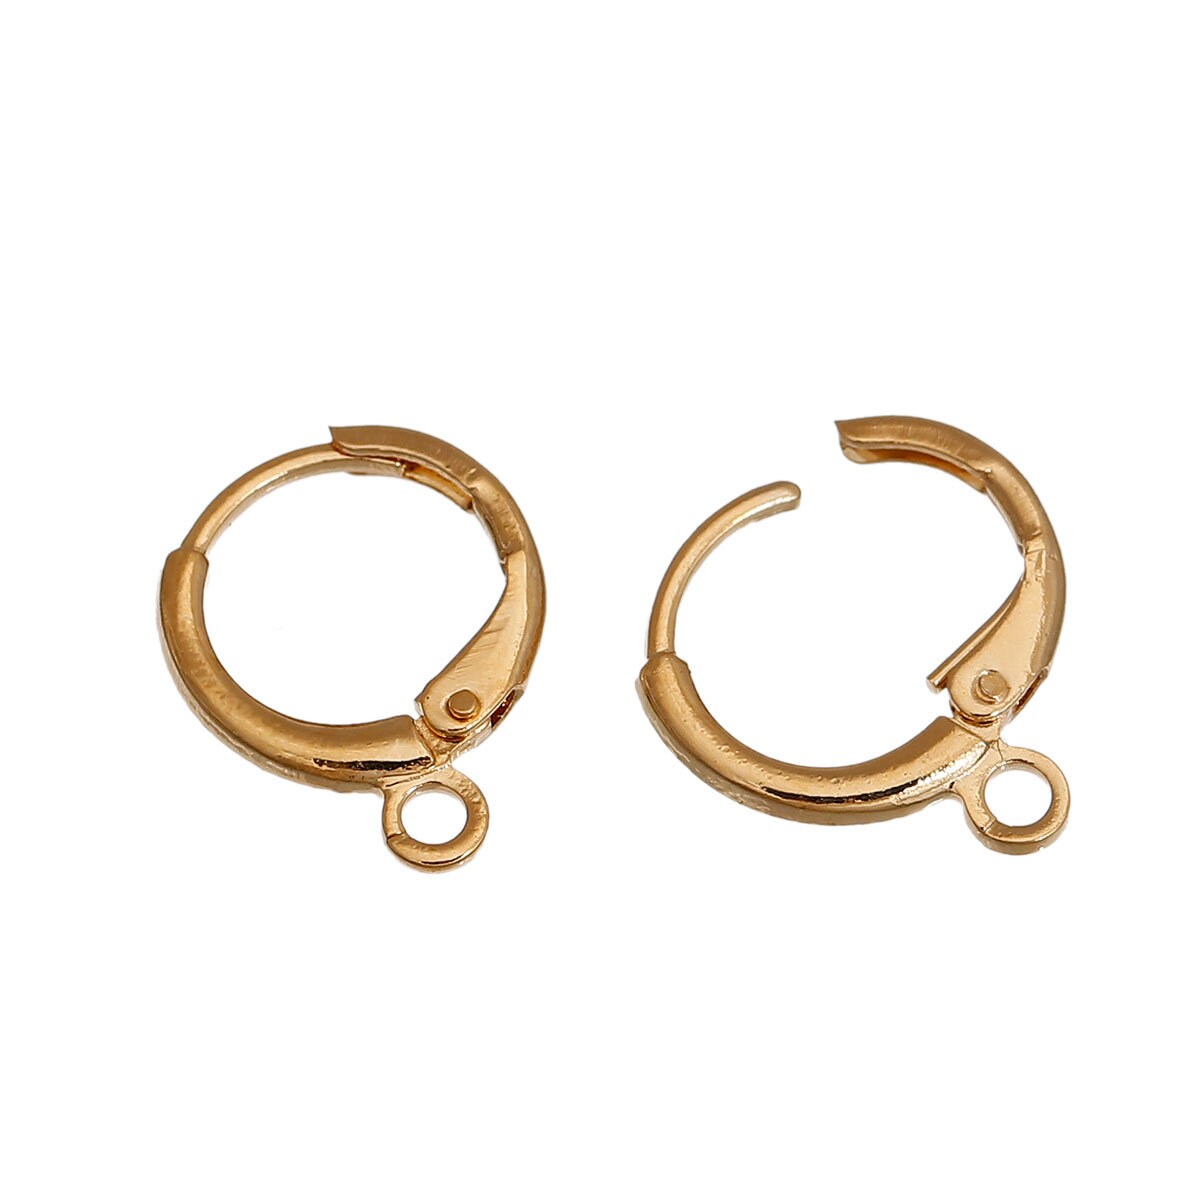 1 Pair Interchangeable Leverback Earring Hooks Earring Component in  Sterling Silver or 14K Gold Filled 